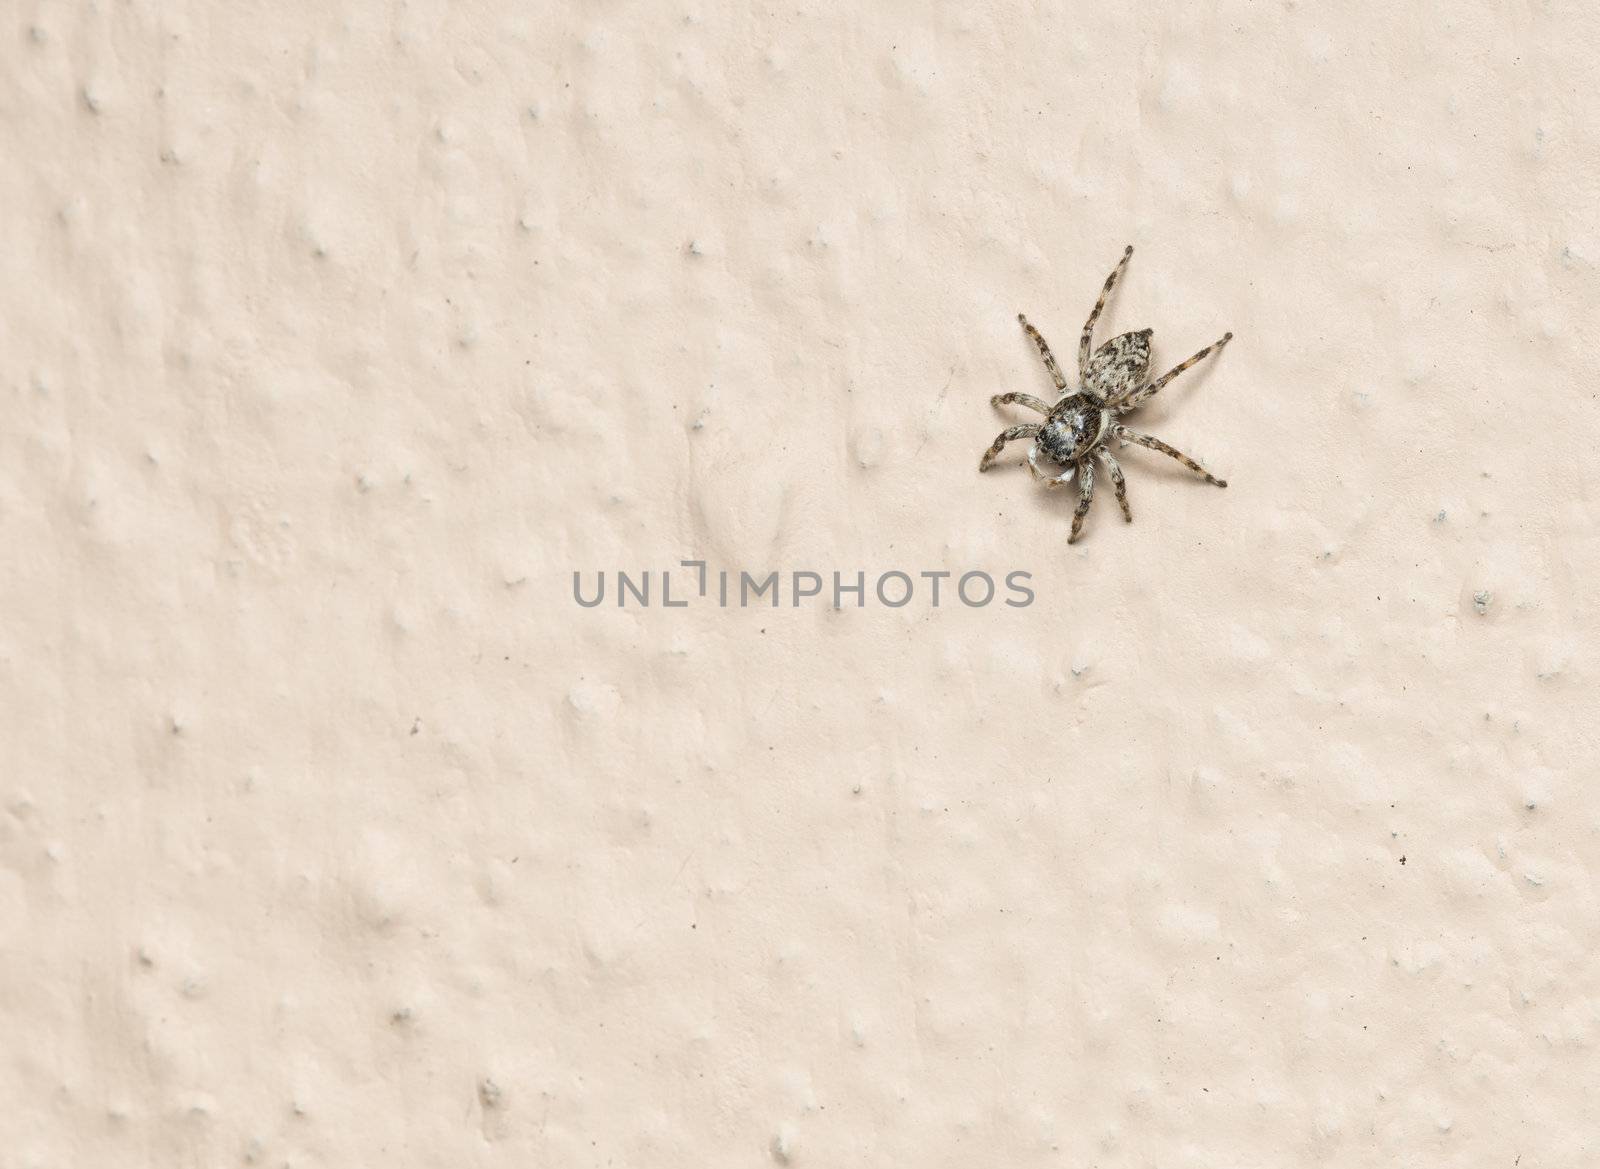 A cautious jumping spider on the wall